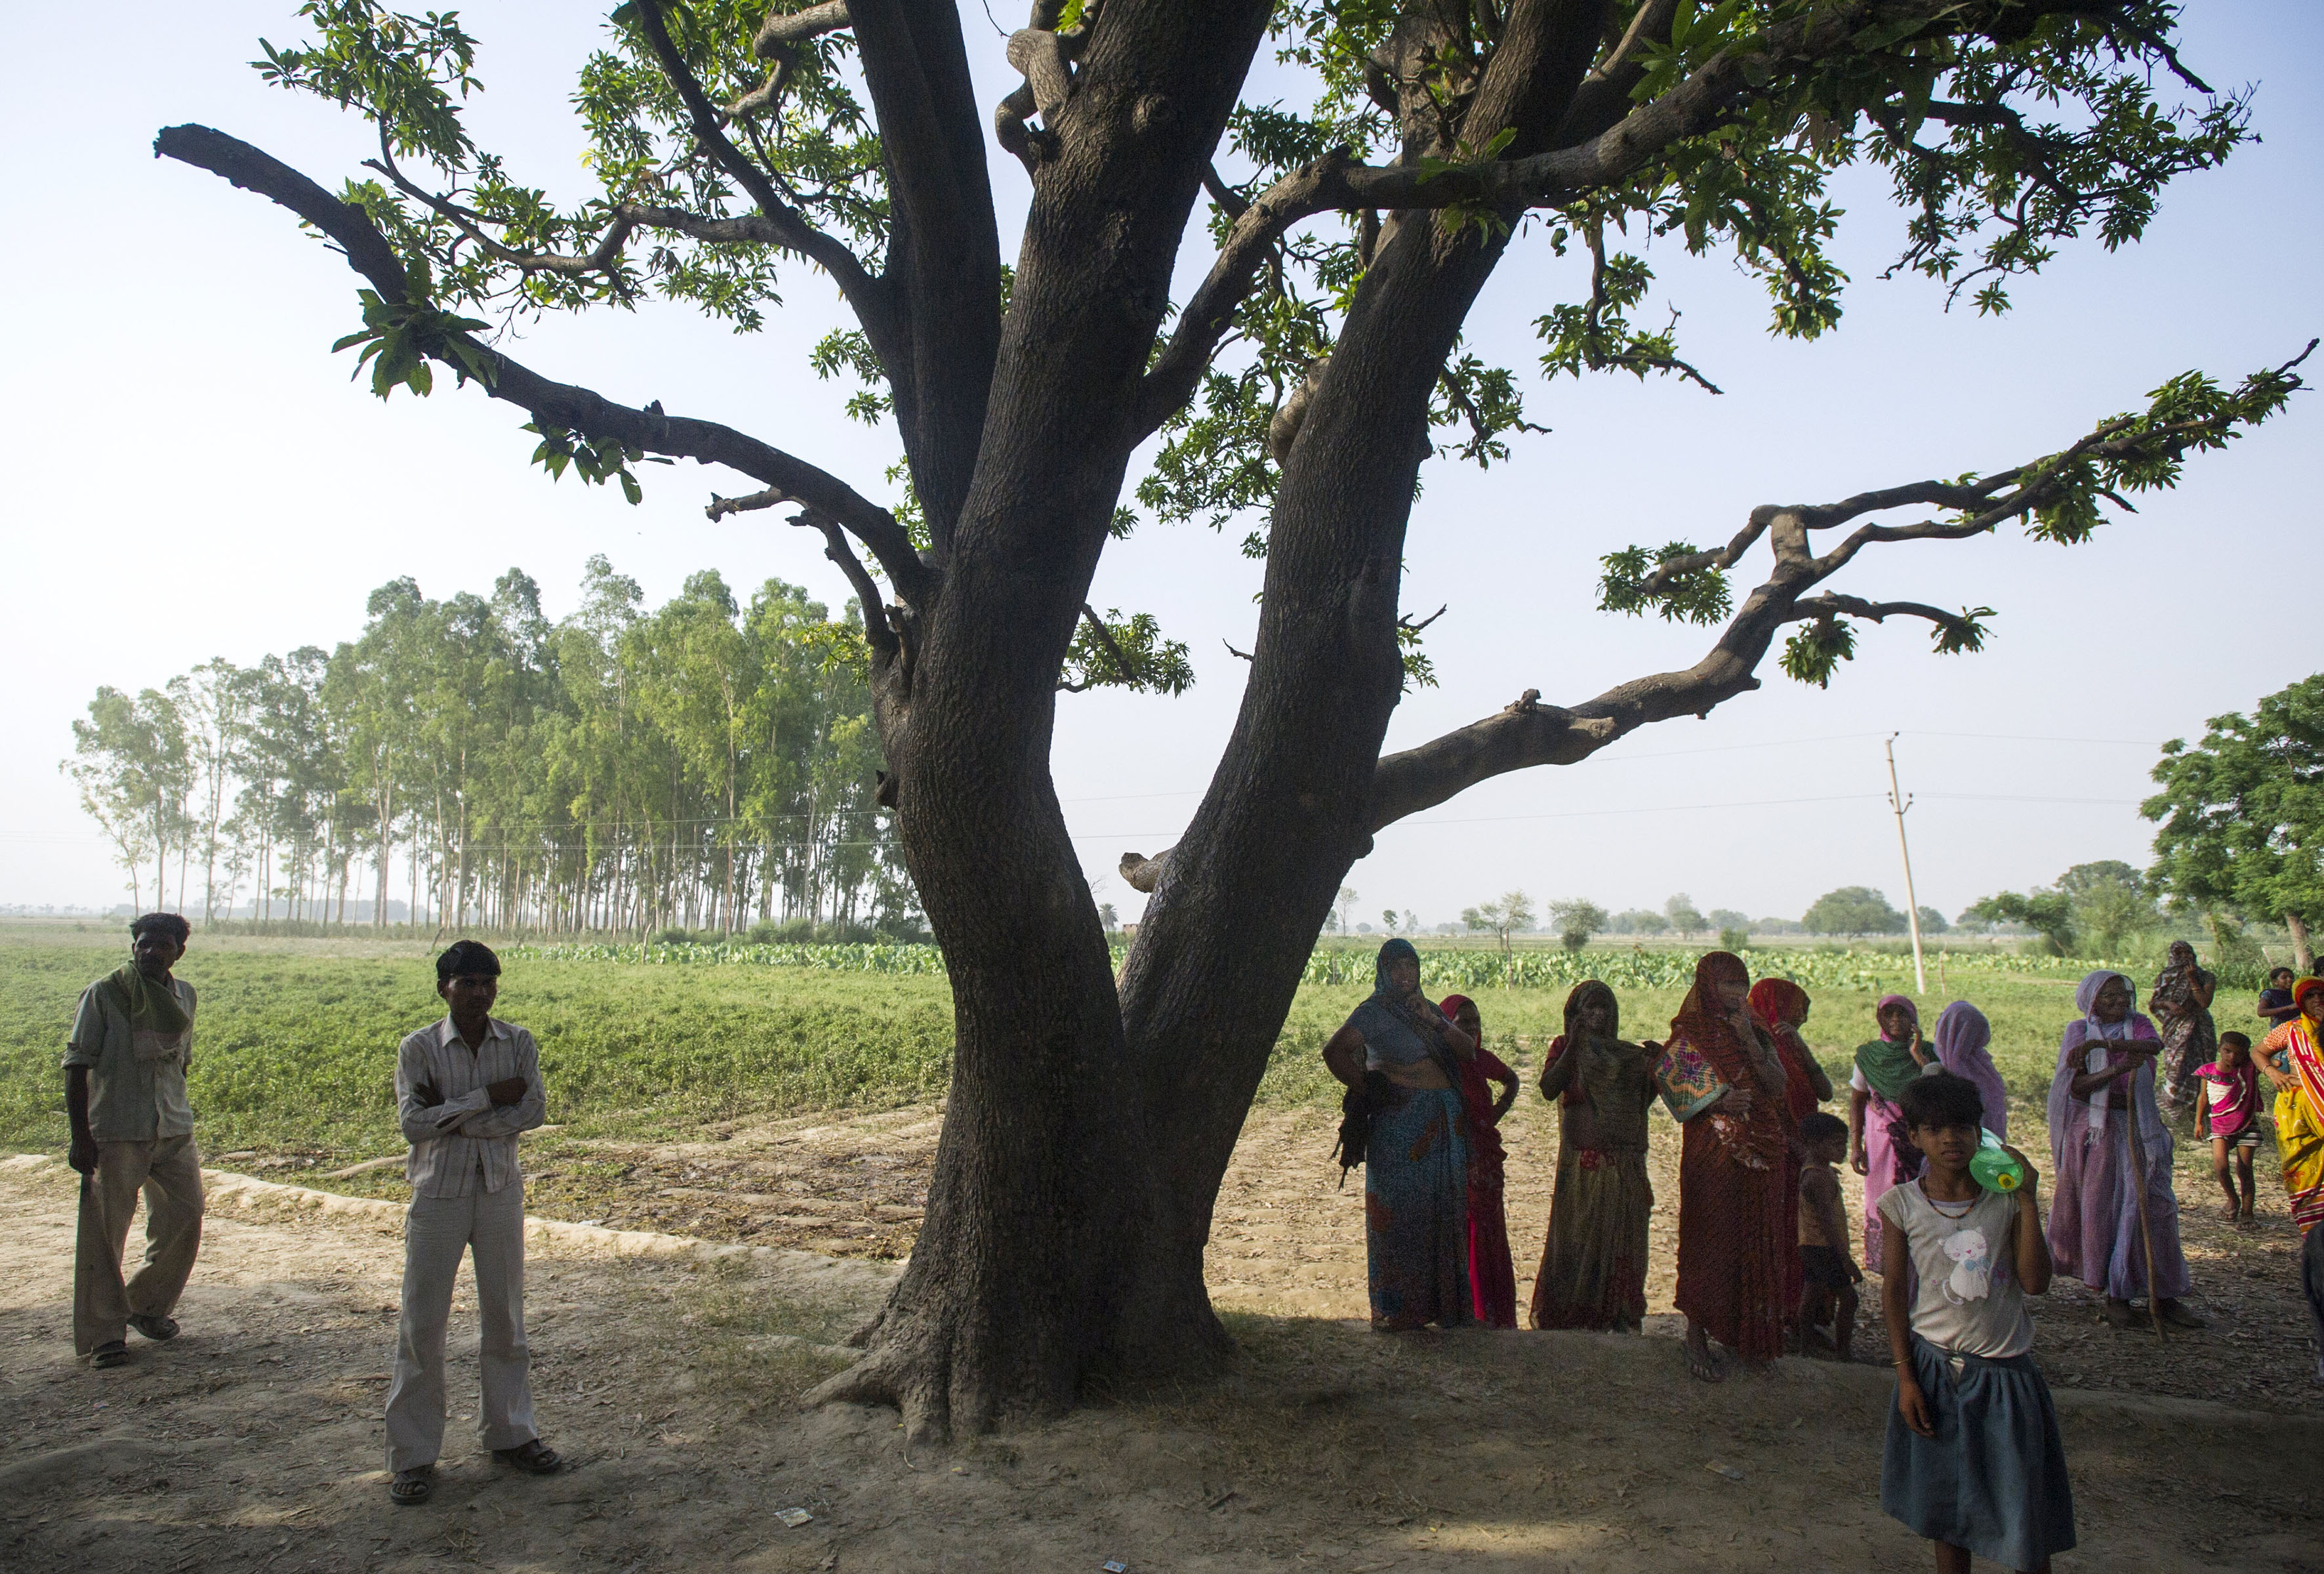 Villagers stand by the mango tree from which the two girls were hanged in Katra Sadatganj village, Uttar Pradesh, India on May 30, 2014.